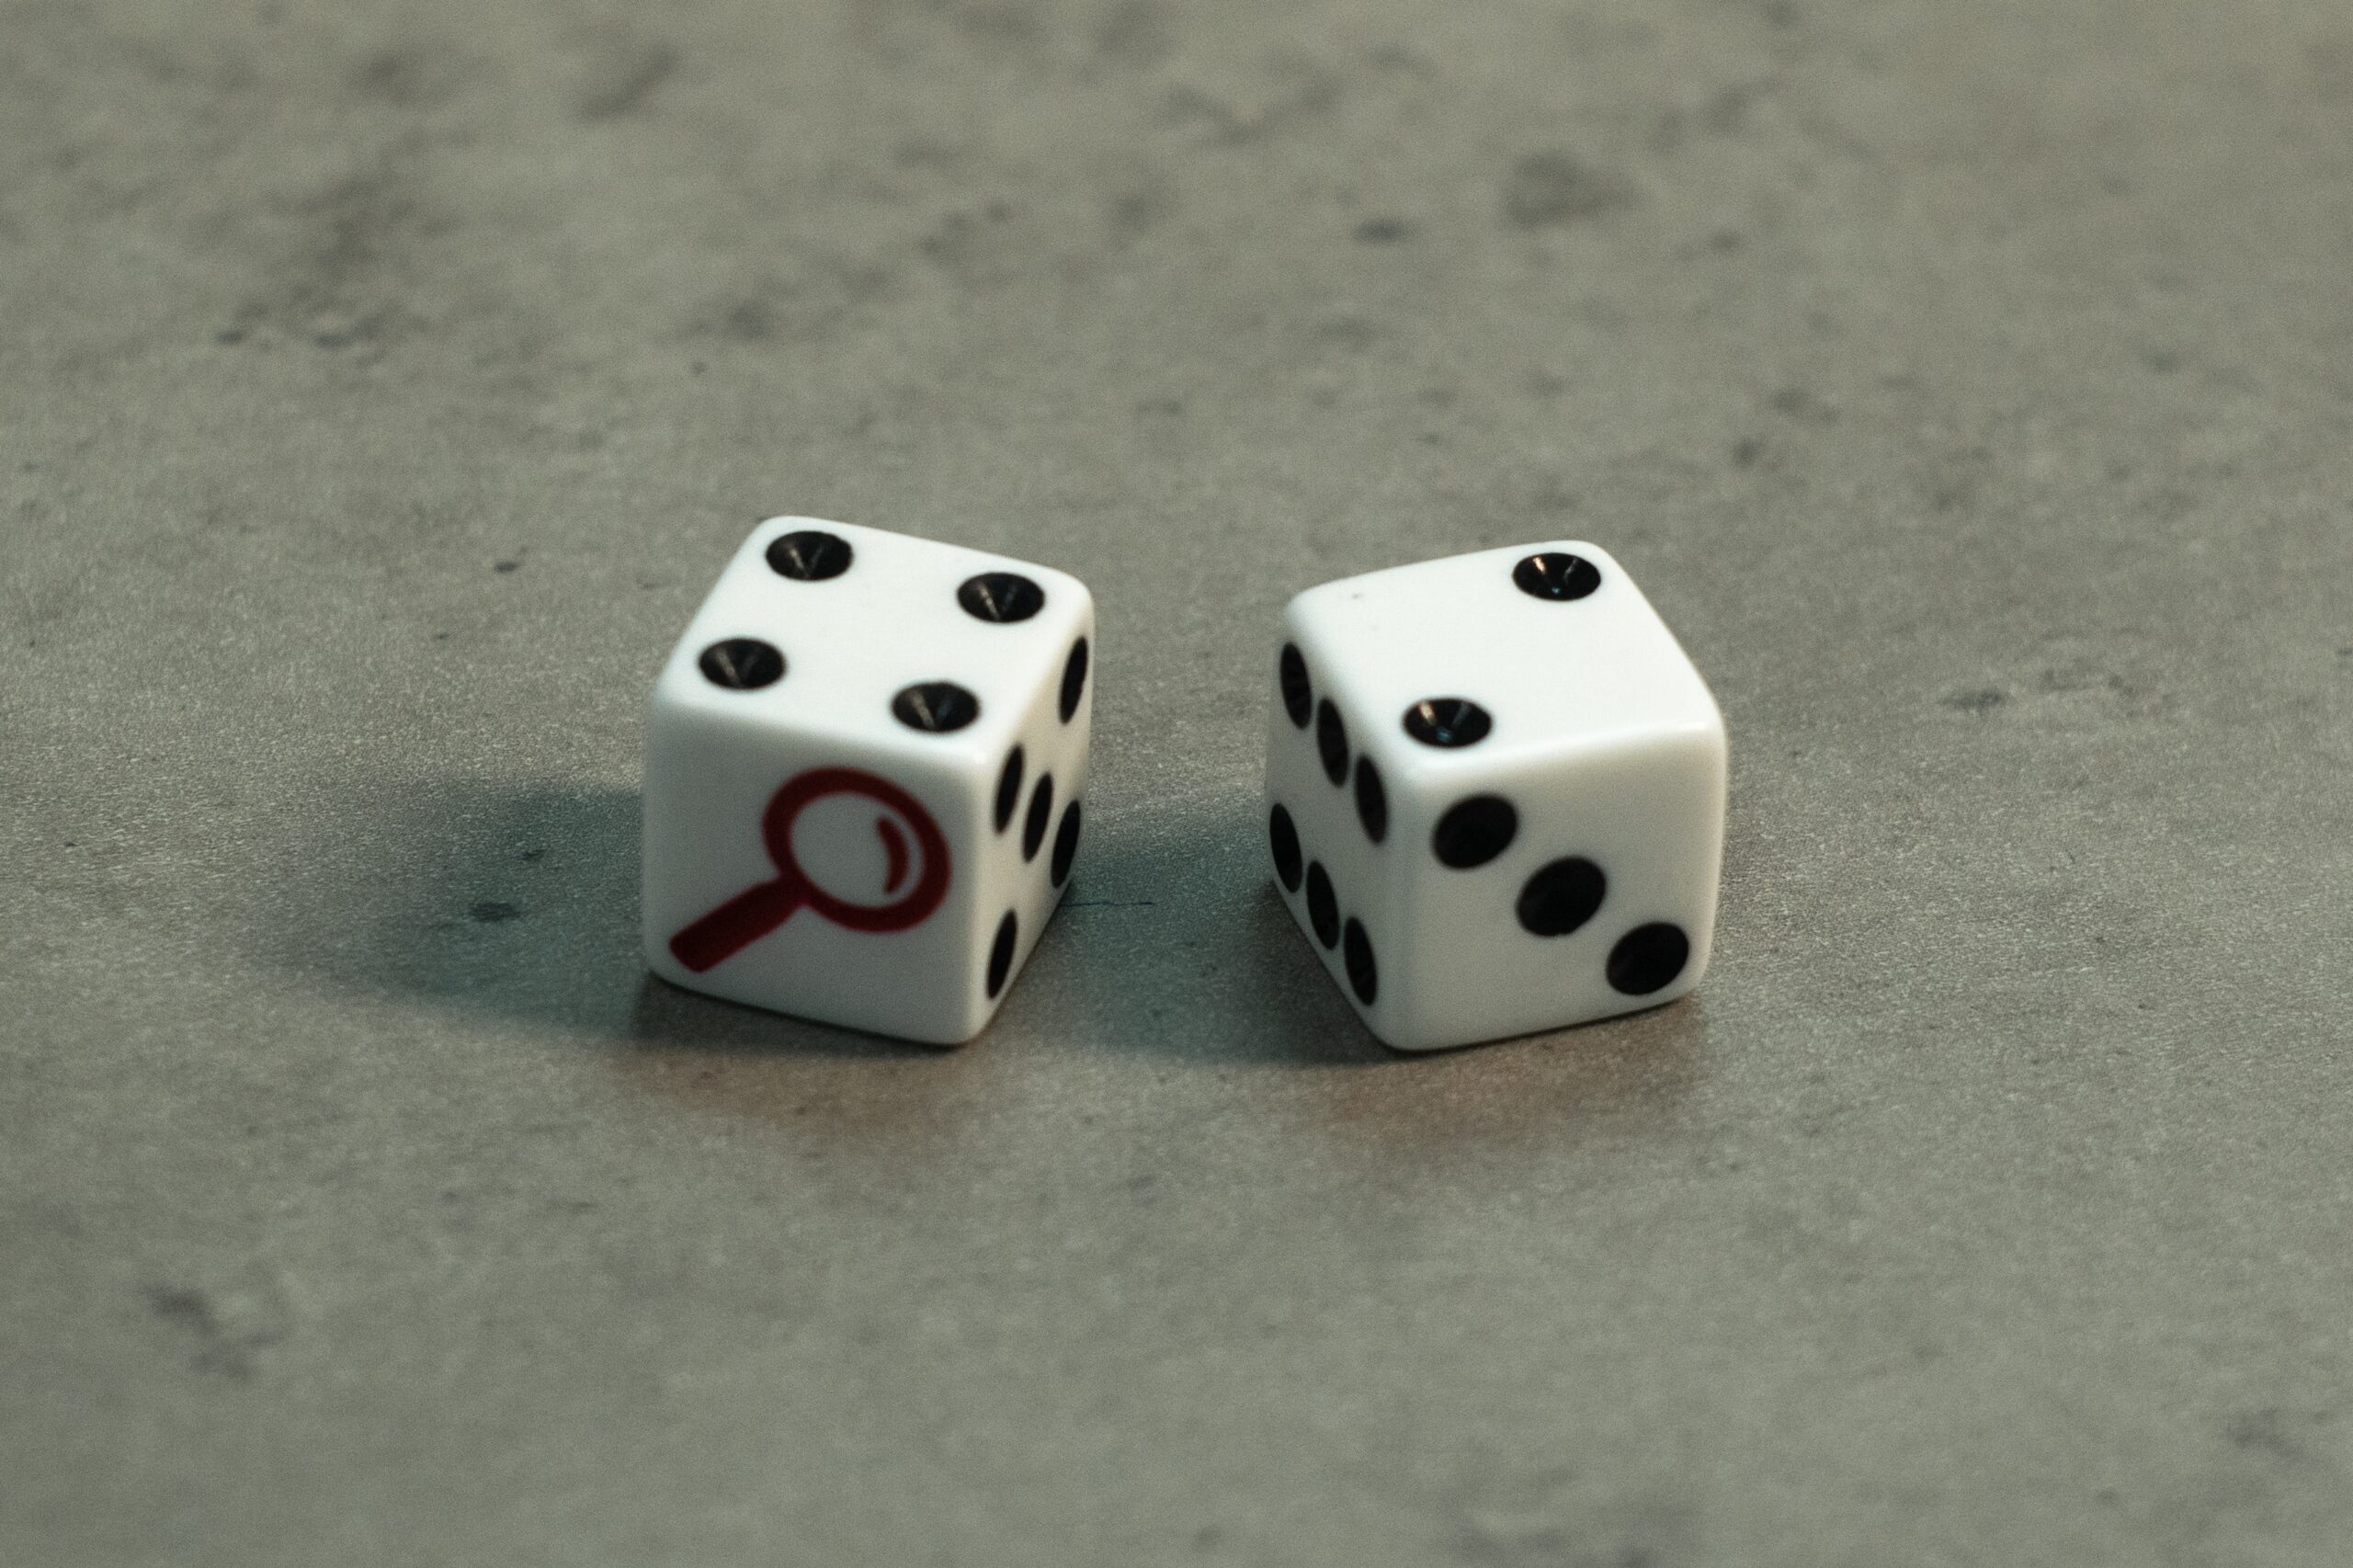 two dice, one of which has a magnifying glass on it